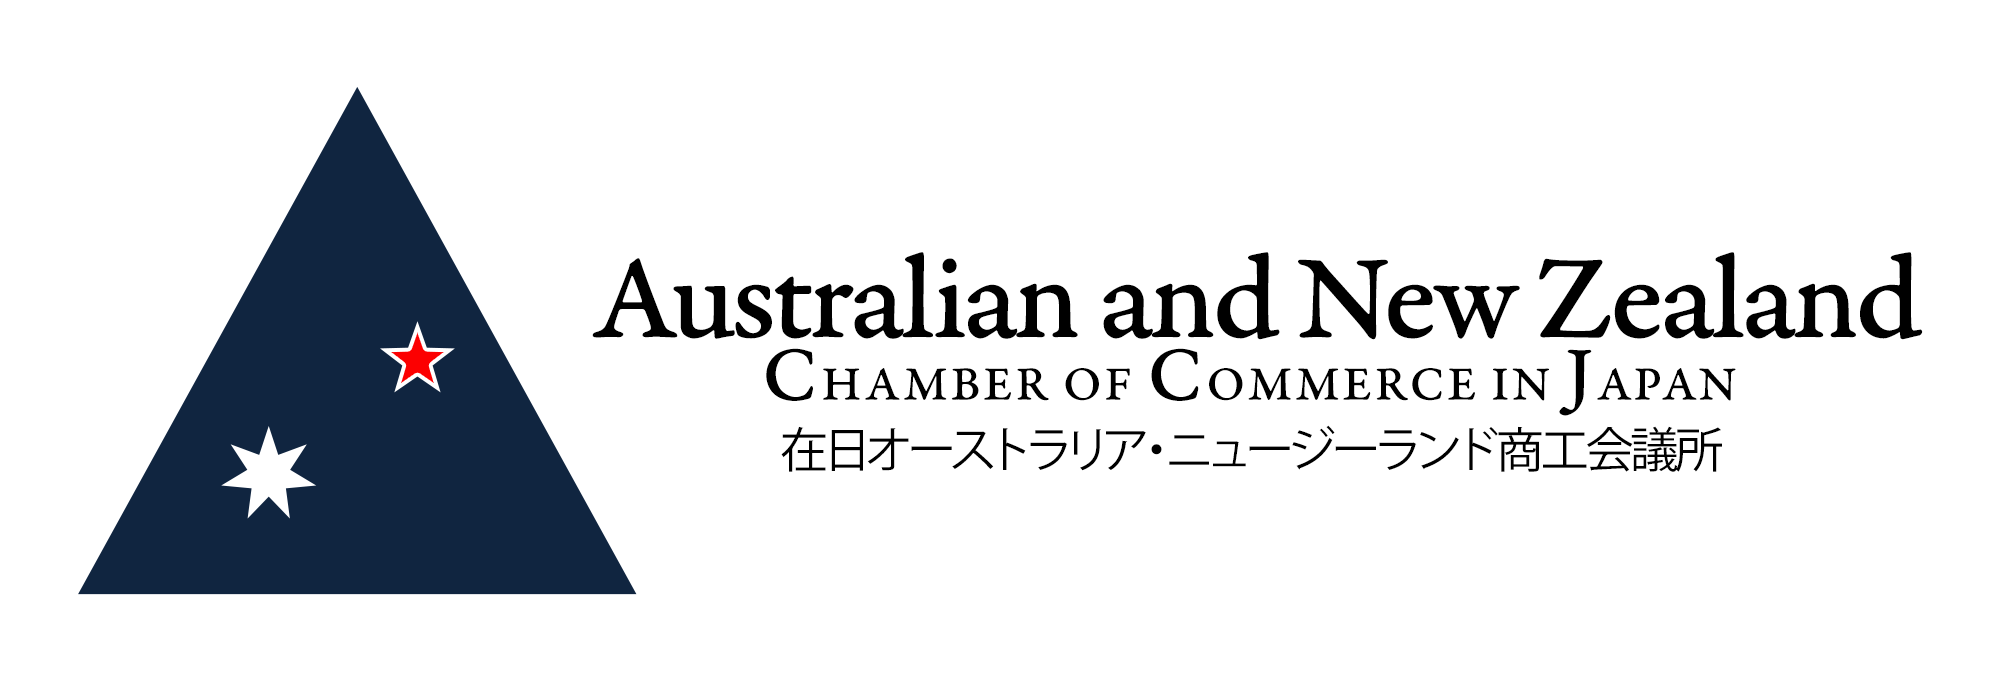 Australian and New Zealand Chamber of Commerce in Japan (ANZCCJ)